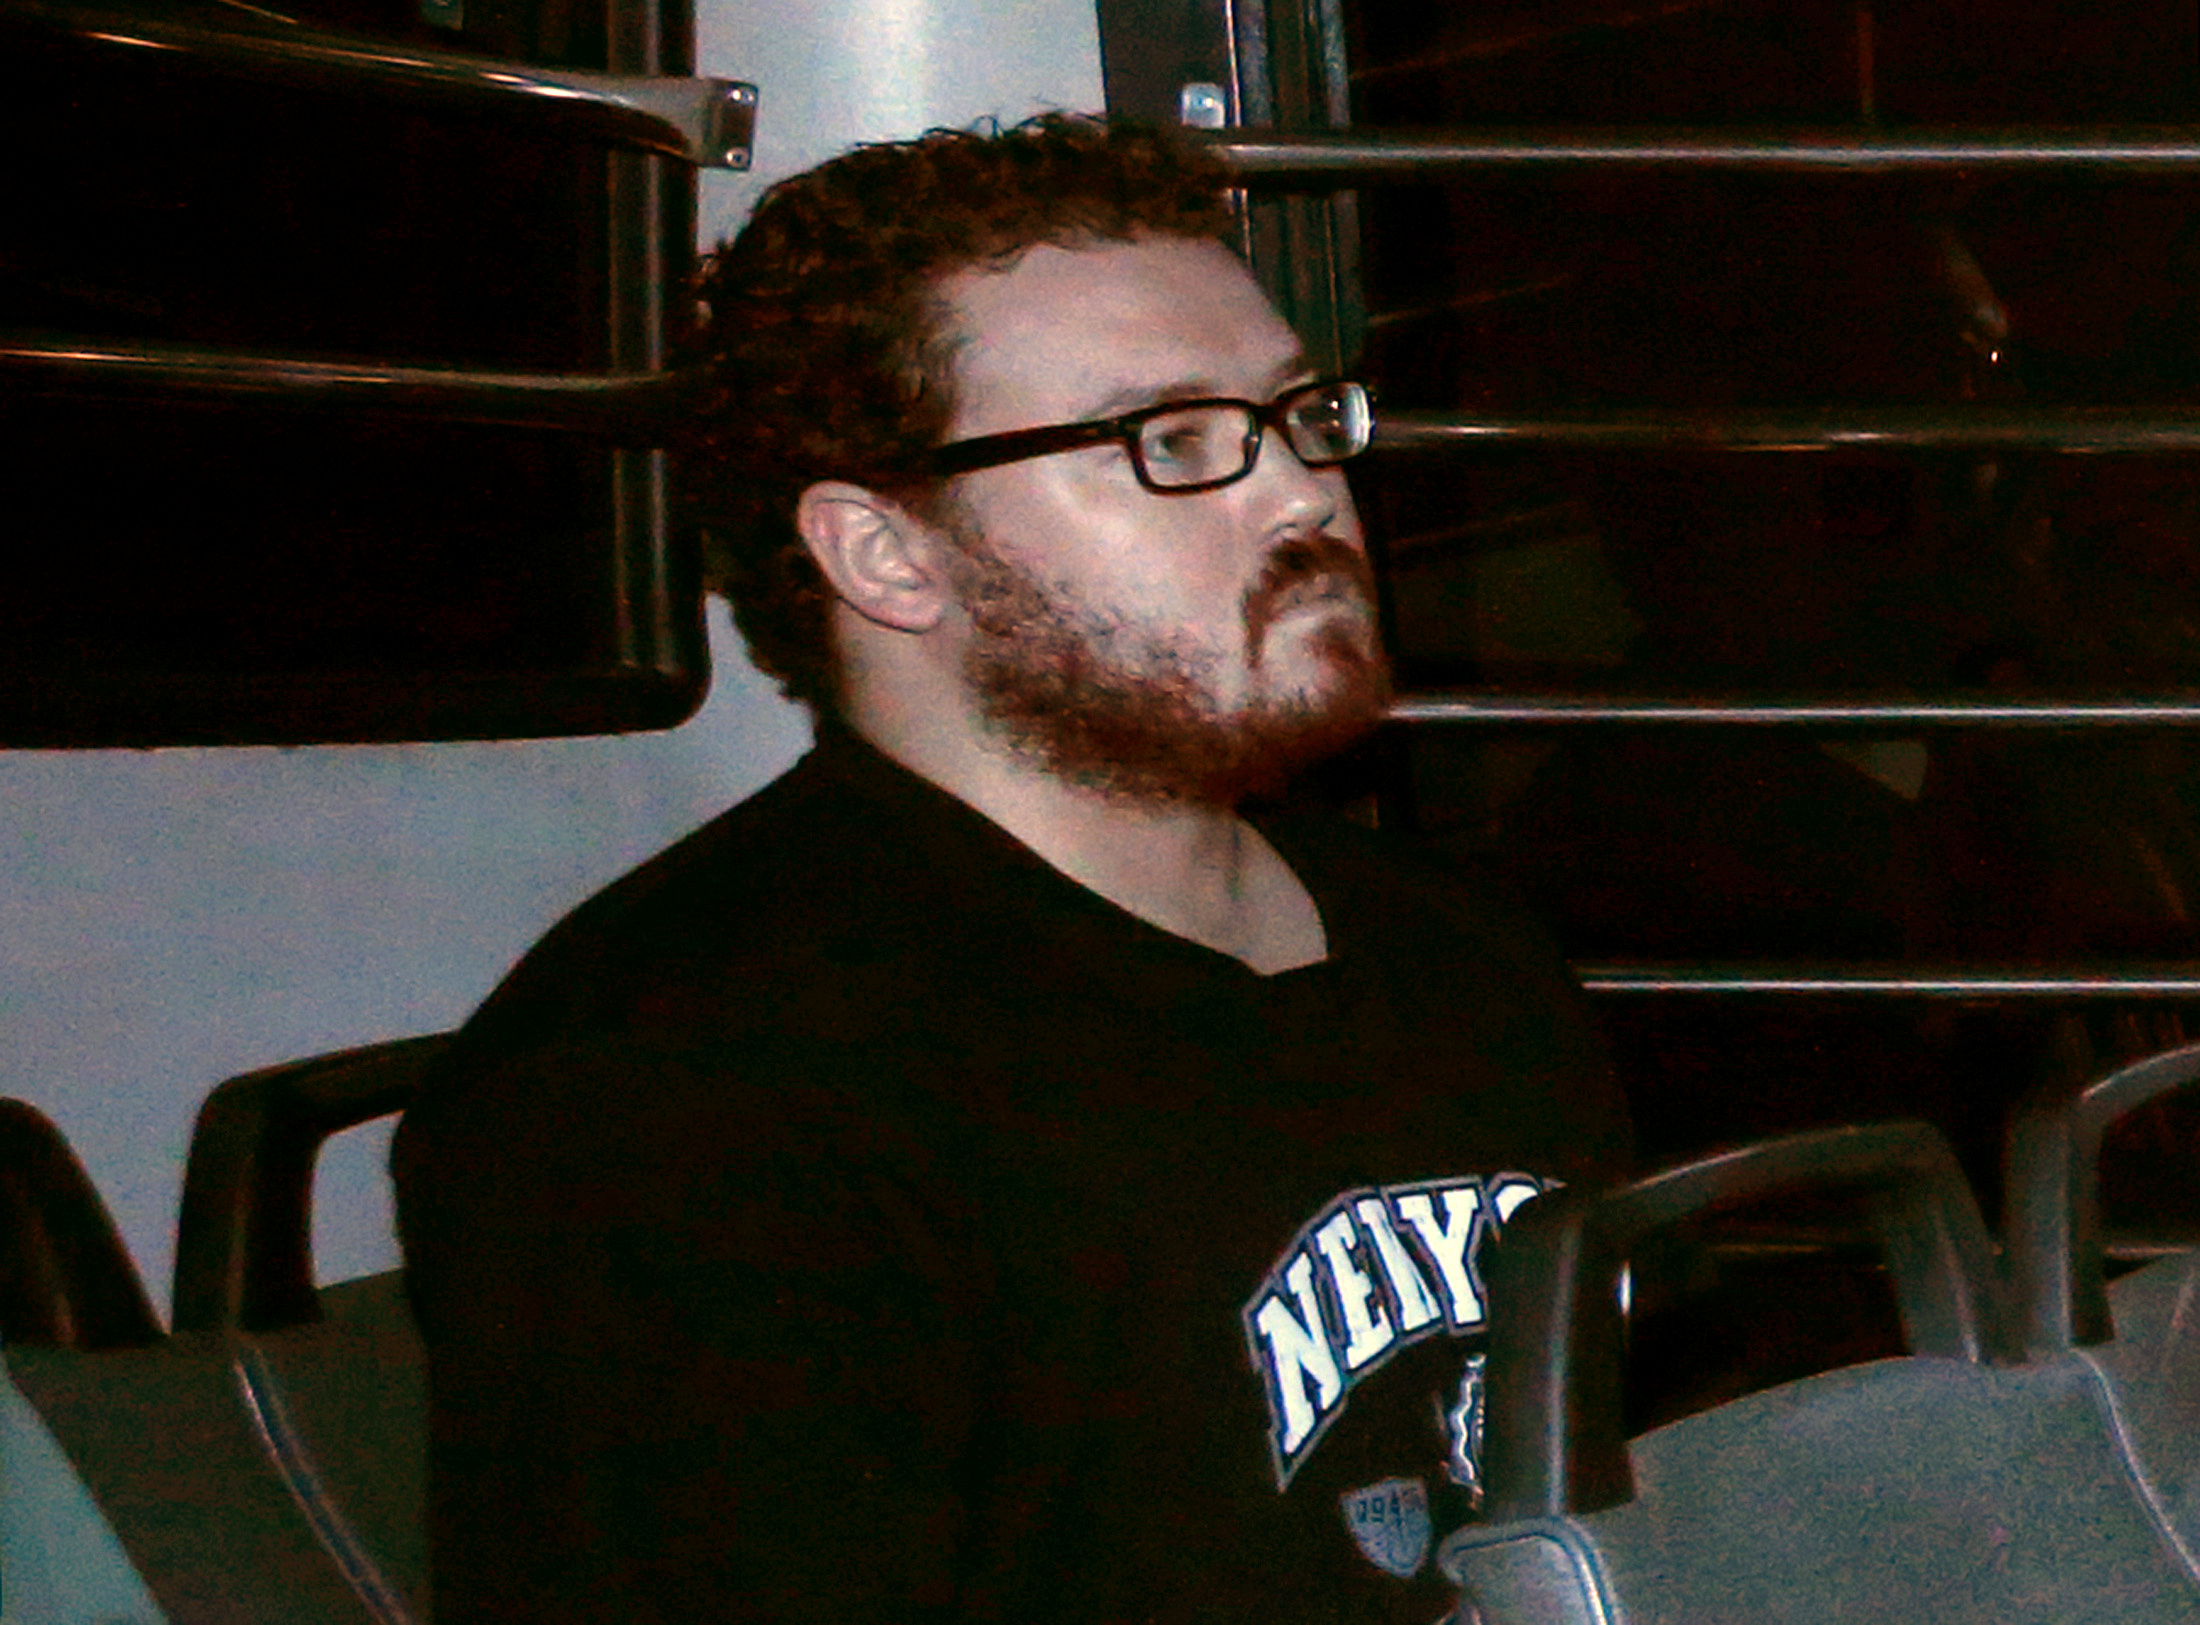 Rurik George Caton Jutting, a British banker charged with two counts of murder after police found the bodies of two women in his apartment, sitting in the back row of a prison bus as he arrives at the Eastern Law Courts in Hong Kong on Nov. 24, 2014 (Bobby Yip—Reuters)